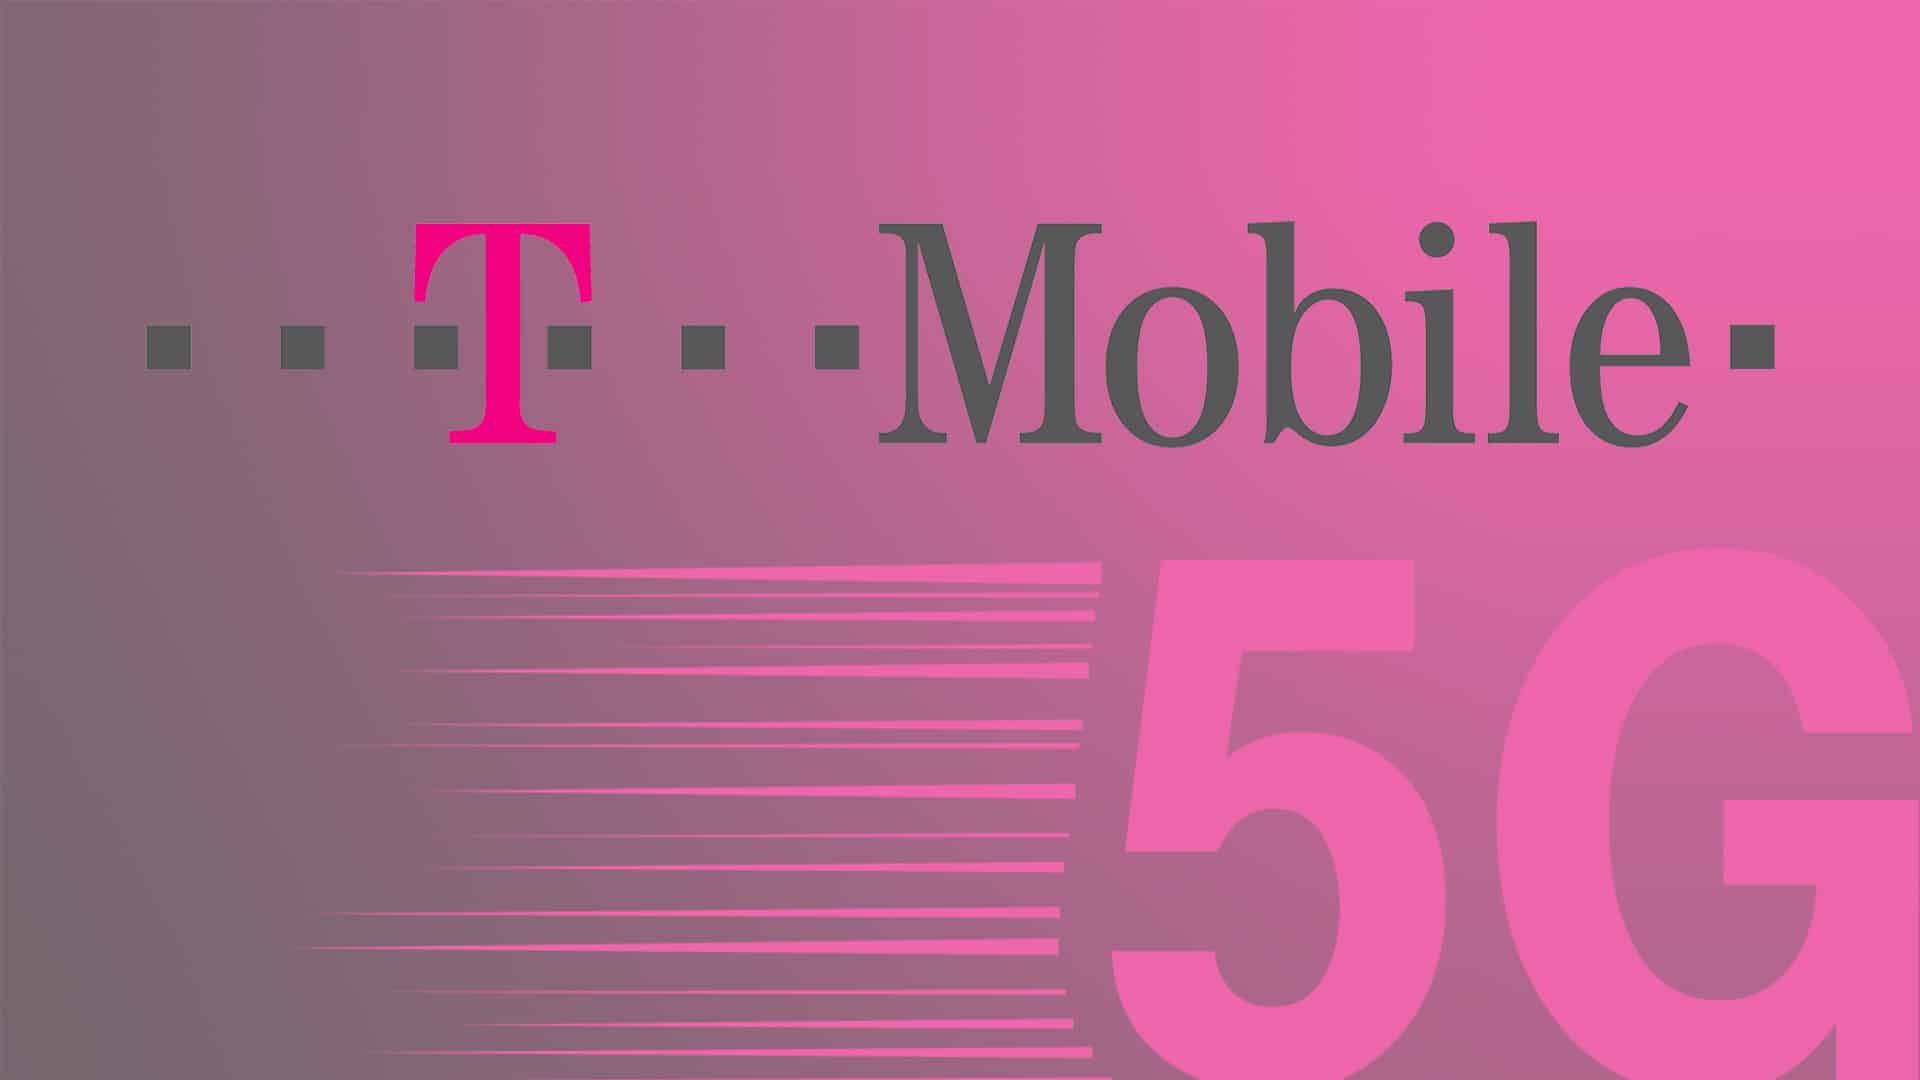 5G T-Mobile